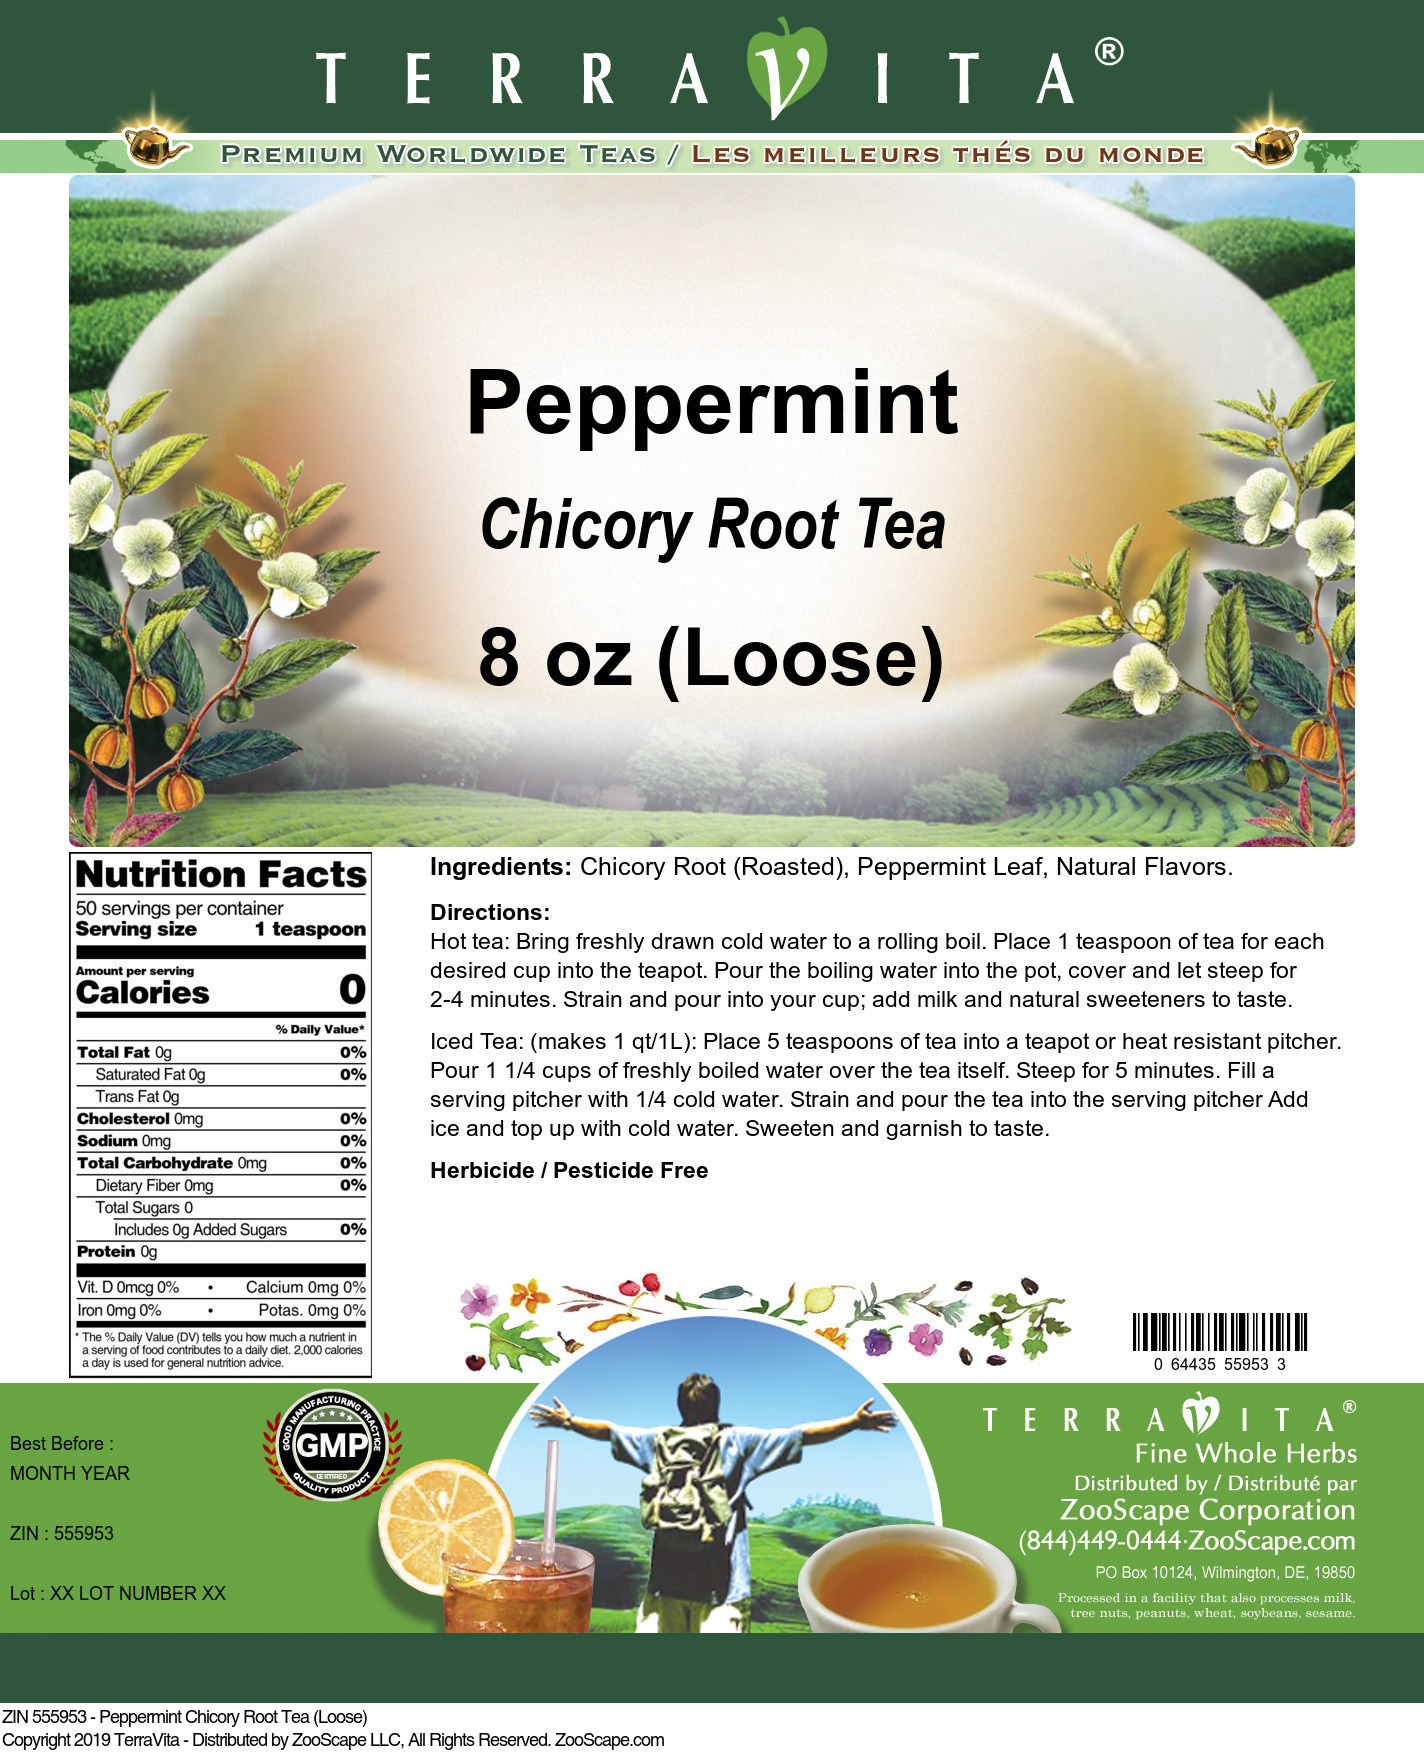 Peppermint Chicory Root Tea (Loose) - Label